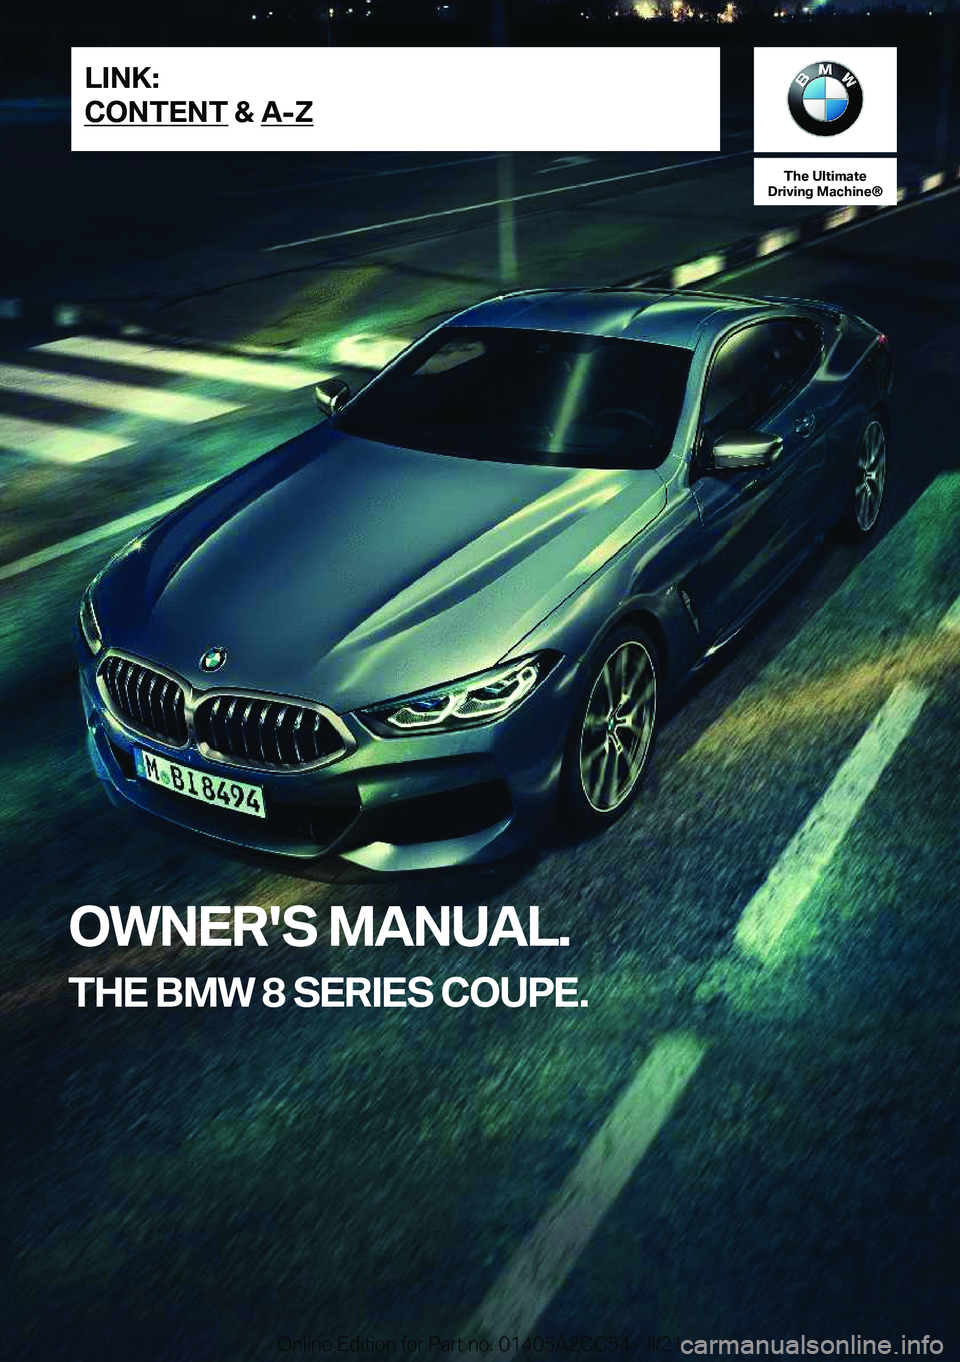 BMW 8 SERIES COUPE 2022  Owners Manual �T�h�e��U�l�t�i�m�a�t�e
�D�r�i�v�i�n�g��M�a�c�h�i�n�e�n
�O�W�N�E�R�'�S��M�A�N�U�A�L�.
�T�H�E��B�M�W��8��S�E�R�I�E�S��C�O�U�P�E�.�L�I�N�K�:
�C�O�N�T�E�N�T��&��A�-�Z�O�n�l�i�n�e��E�d�i�t�i